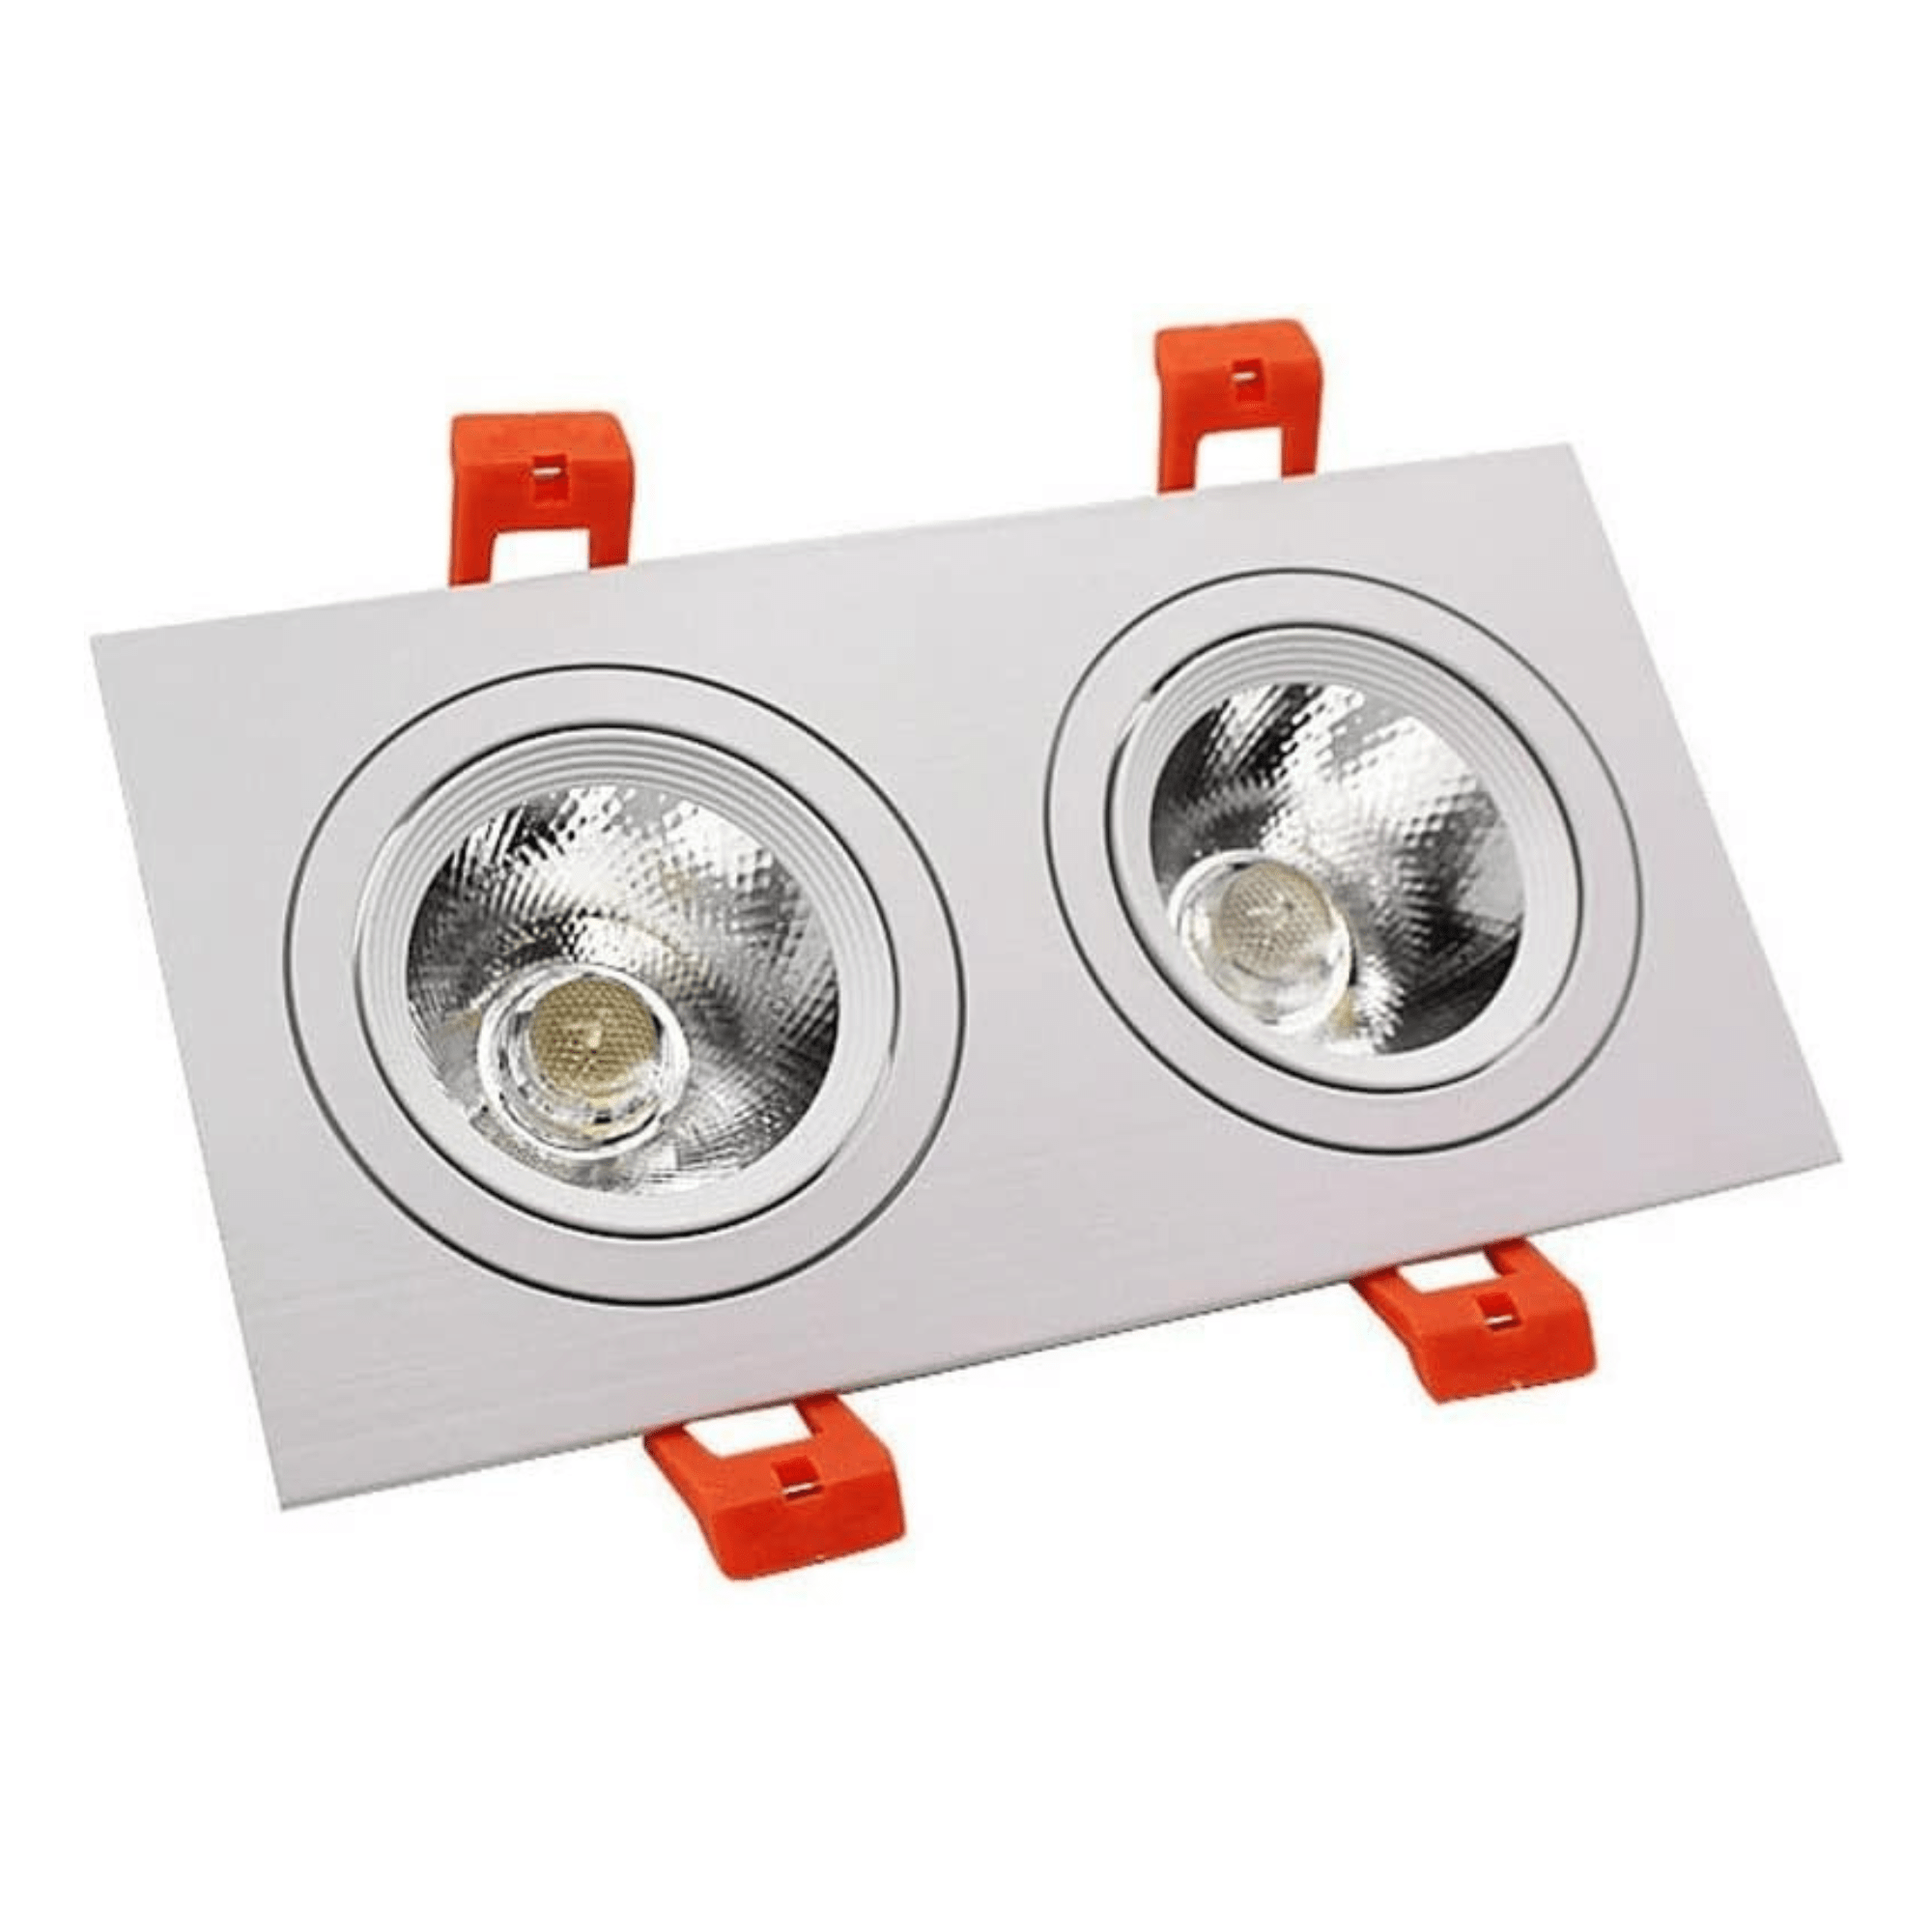 Buy LED Dual Adjustable Square Natural Daylight Recessed Ceiling Downlight 5W 6500K White - SJD-12 | Shop at Supply Master Accra, Ghana Lamps & Lightings Buy Tools hardware Building materials